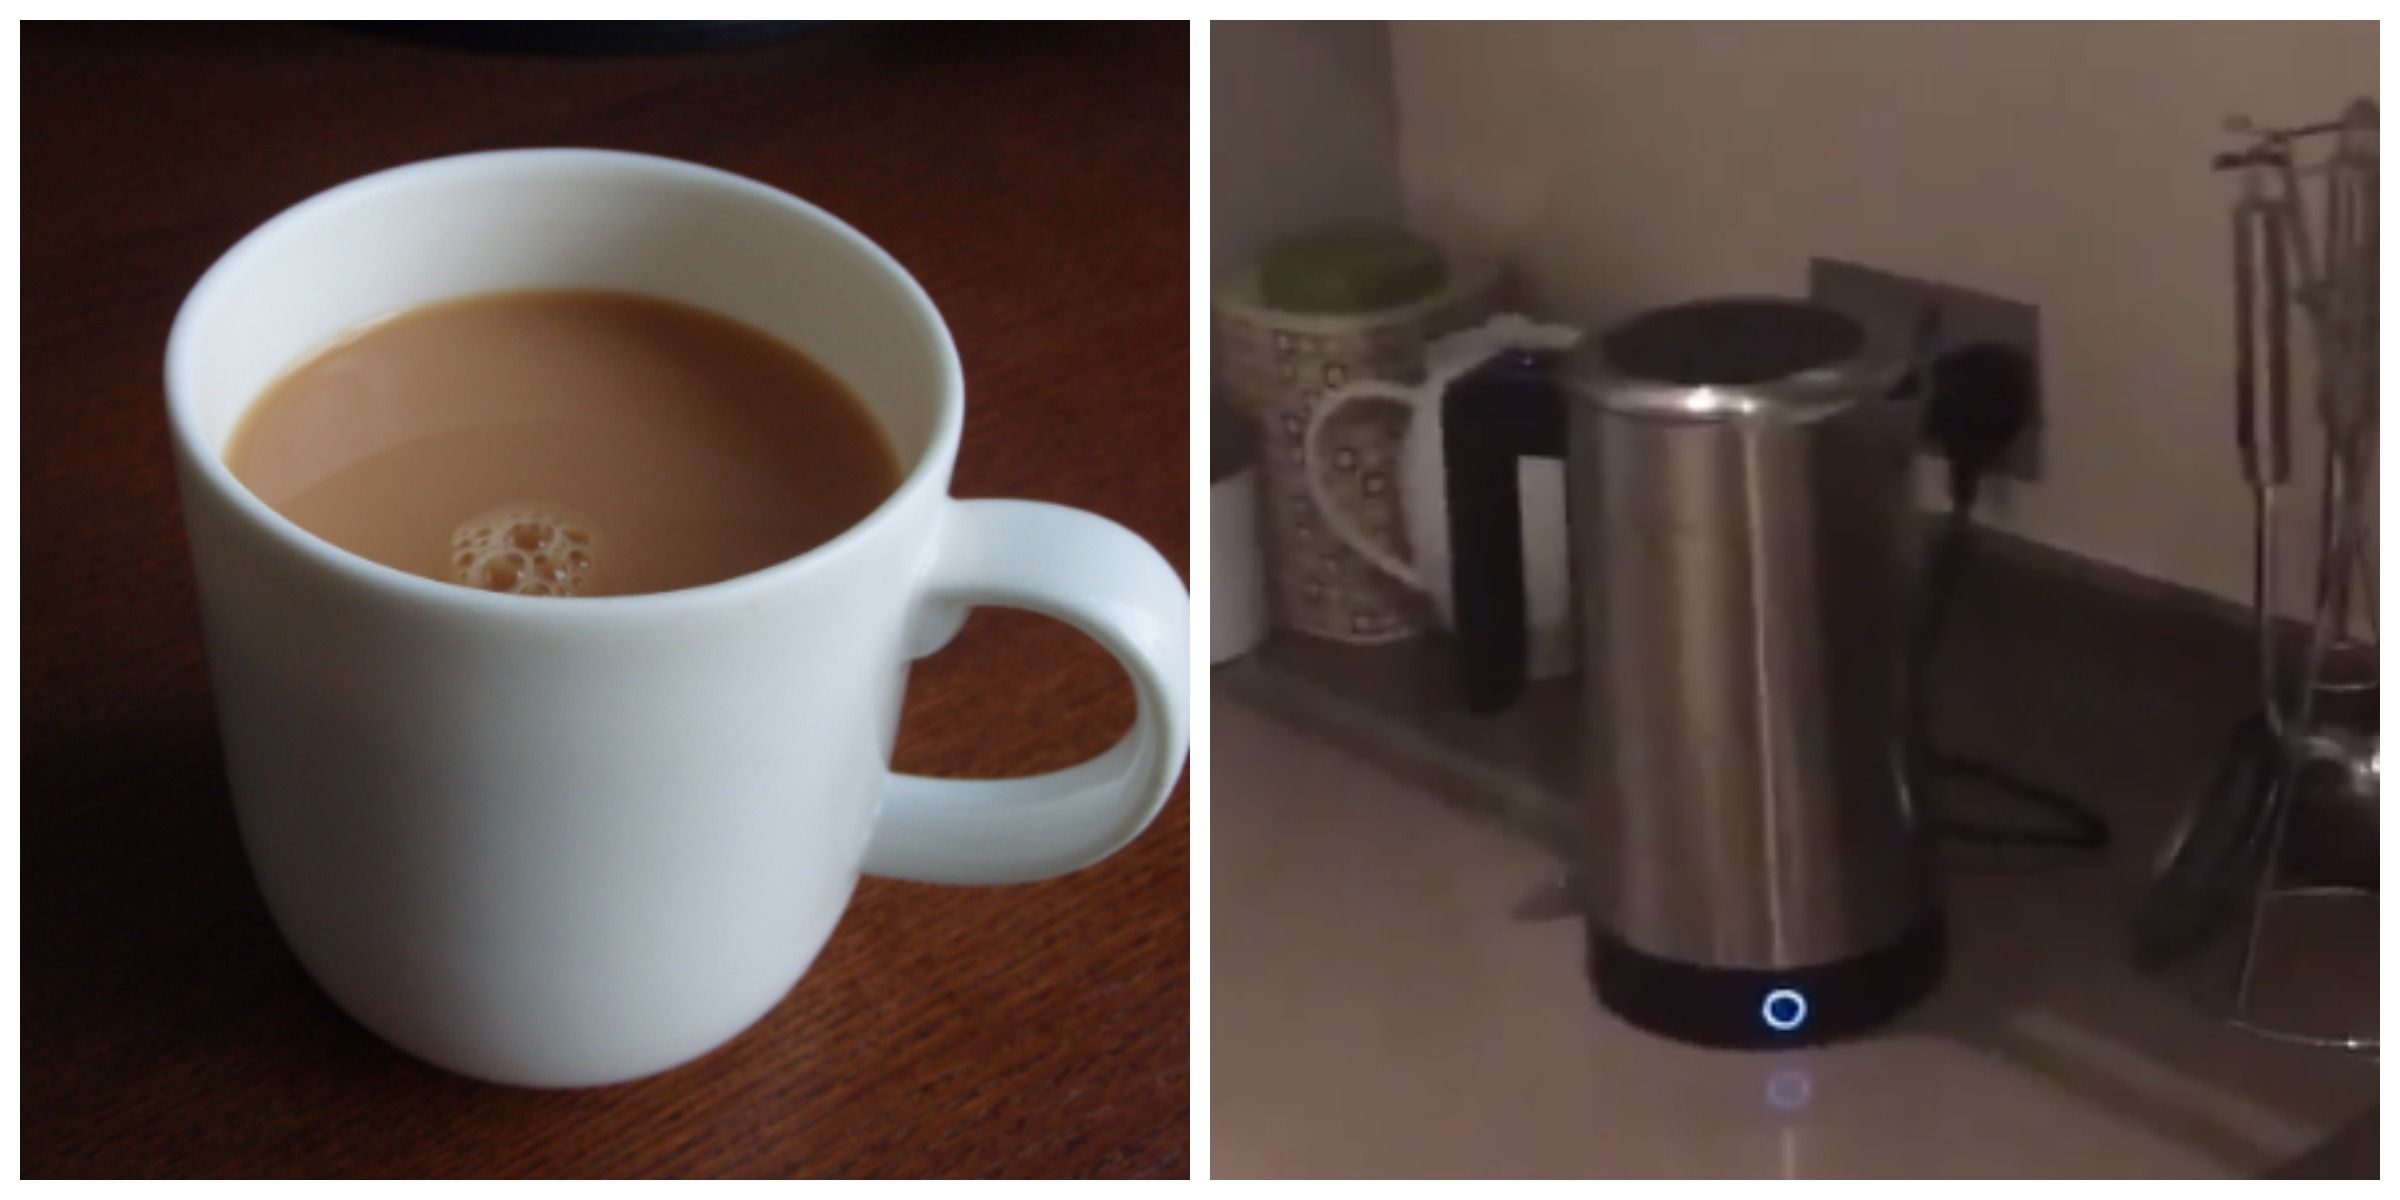 Software engineer spends 11 hours trying to get his Wi-Fi kettle to make a  cup of tea